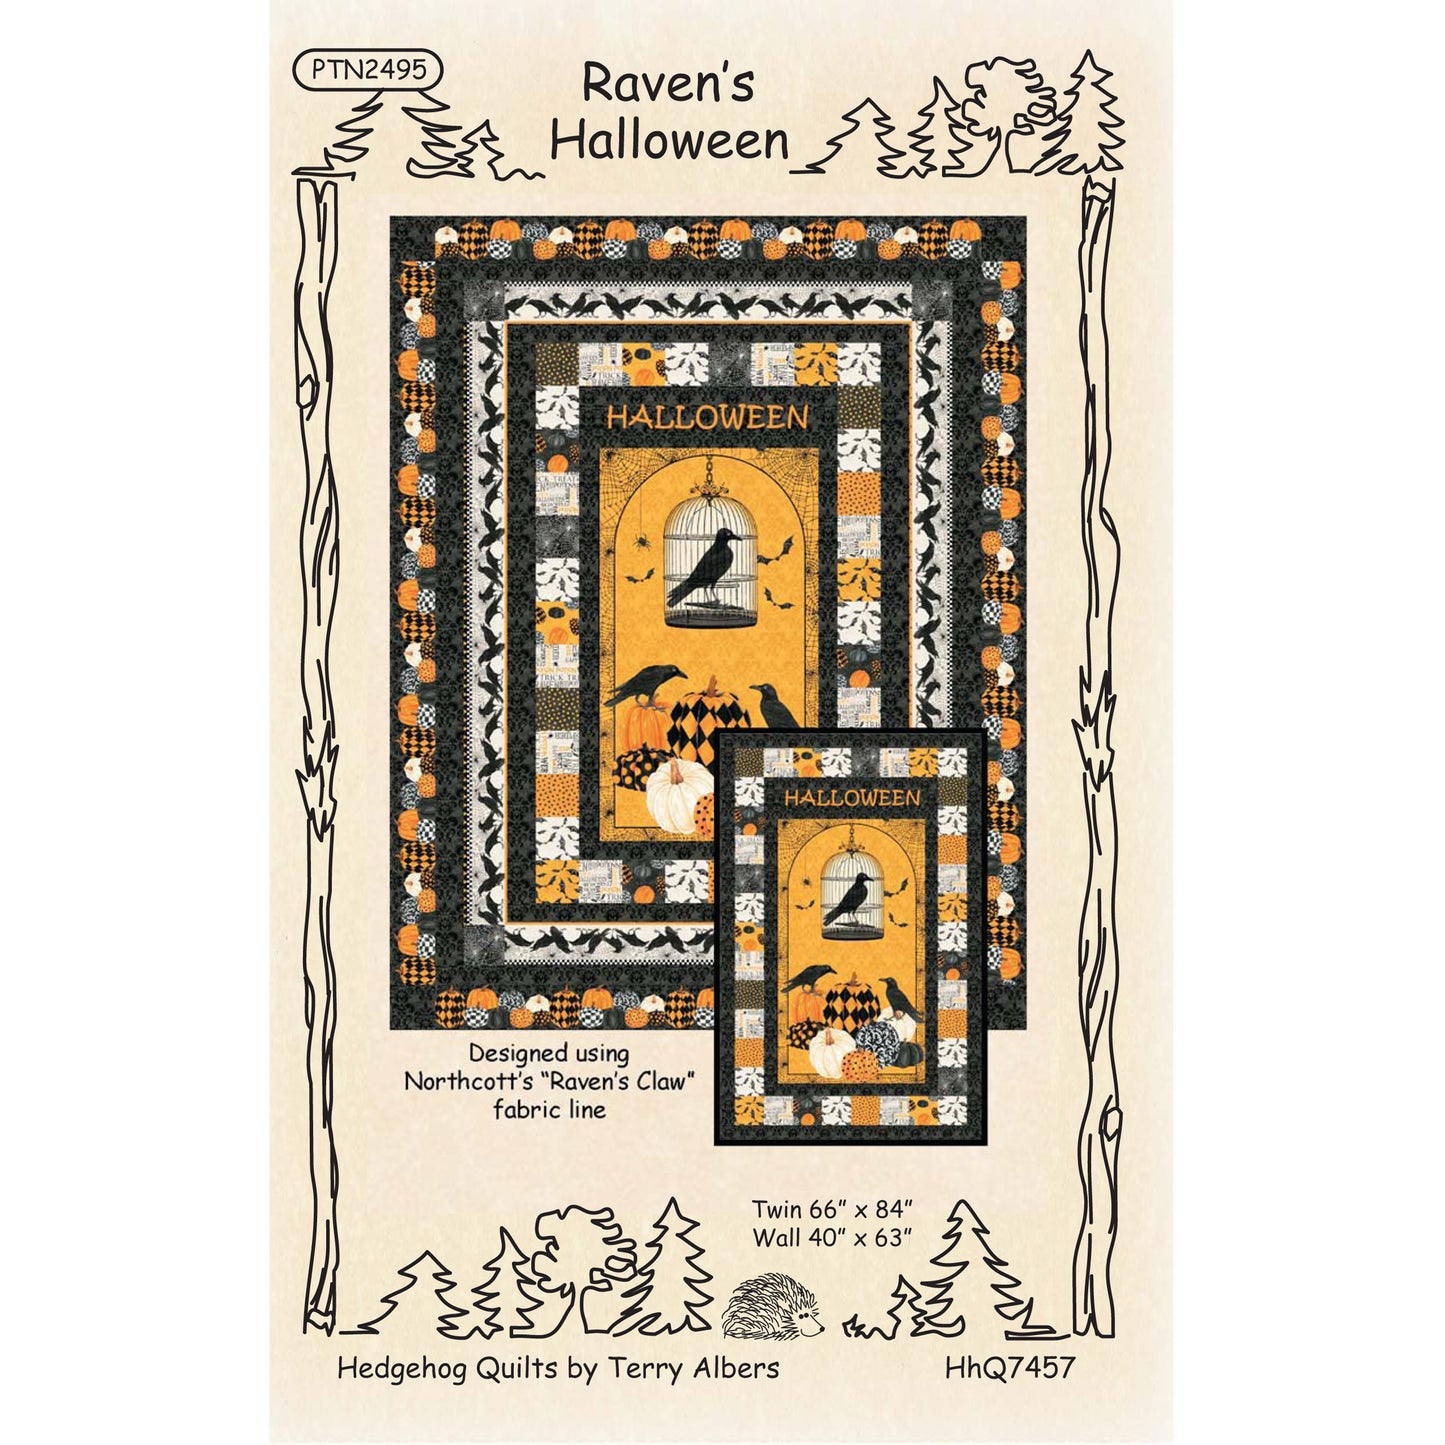 Cover image of pattern for Raven's Halloween Quilt and Wall Hanging.